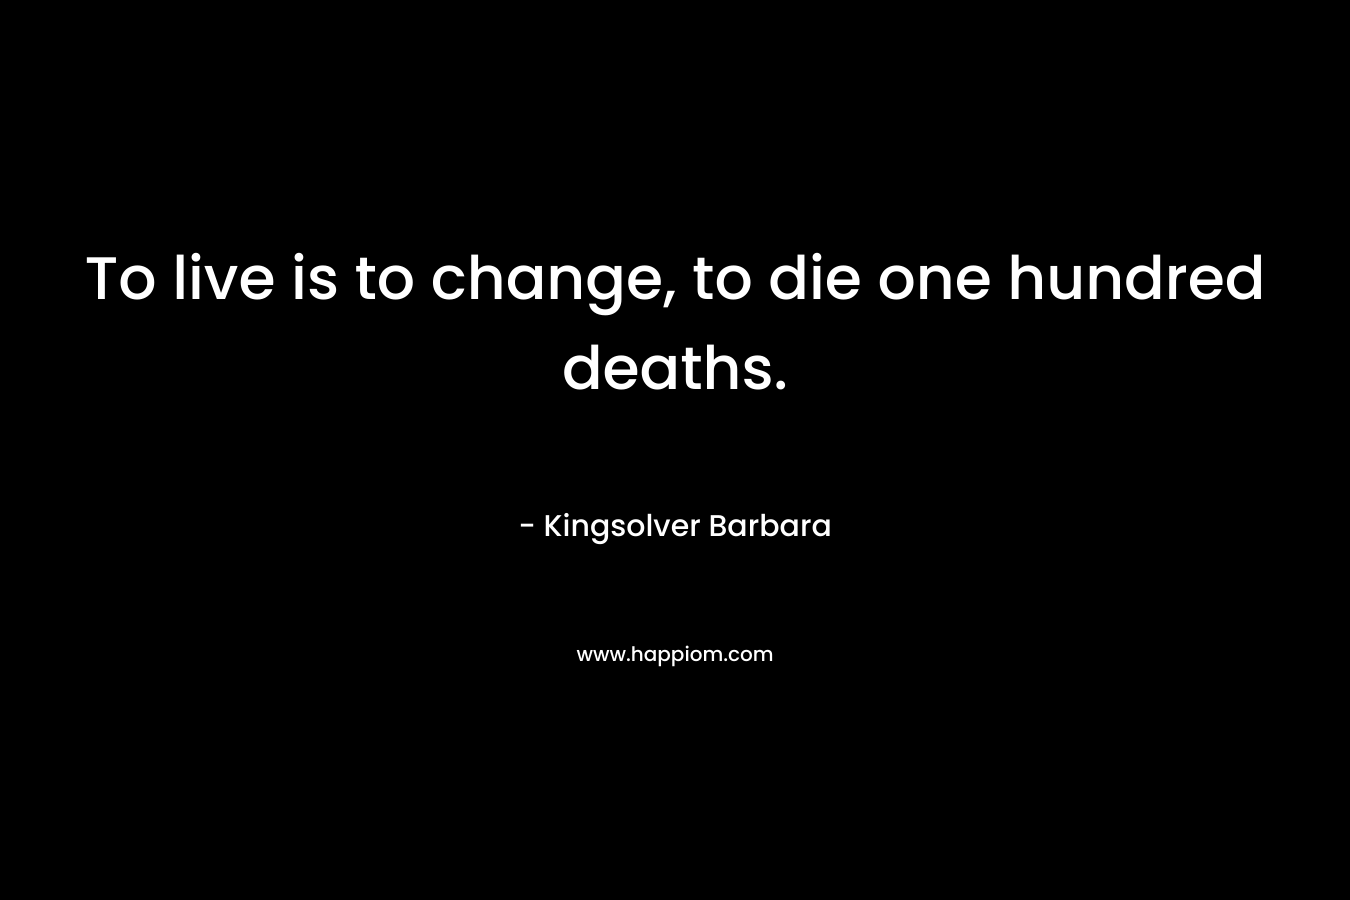 To live is to change, to die one hundred deaths.